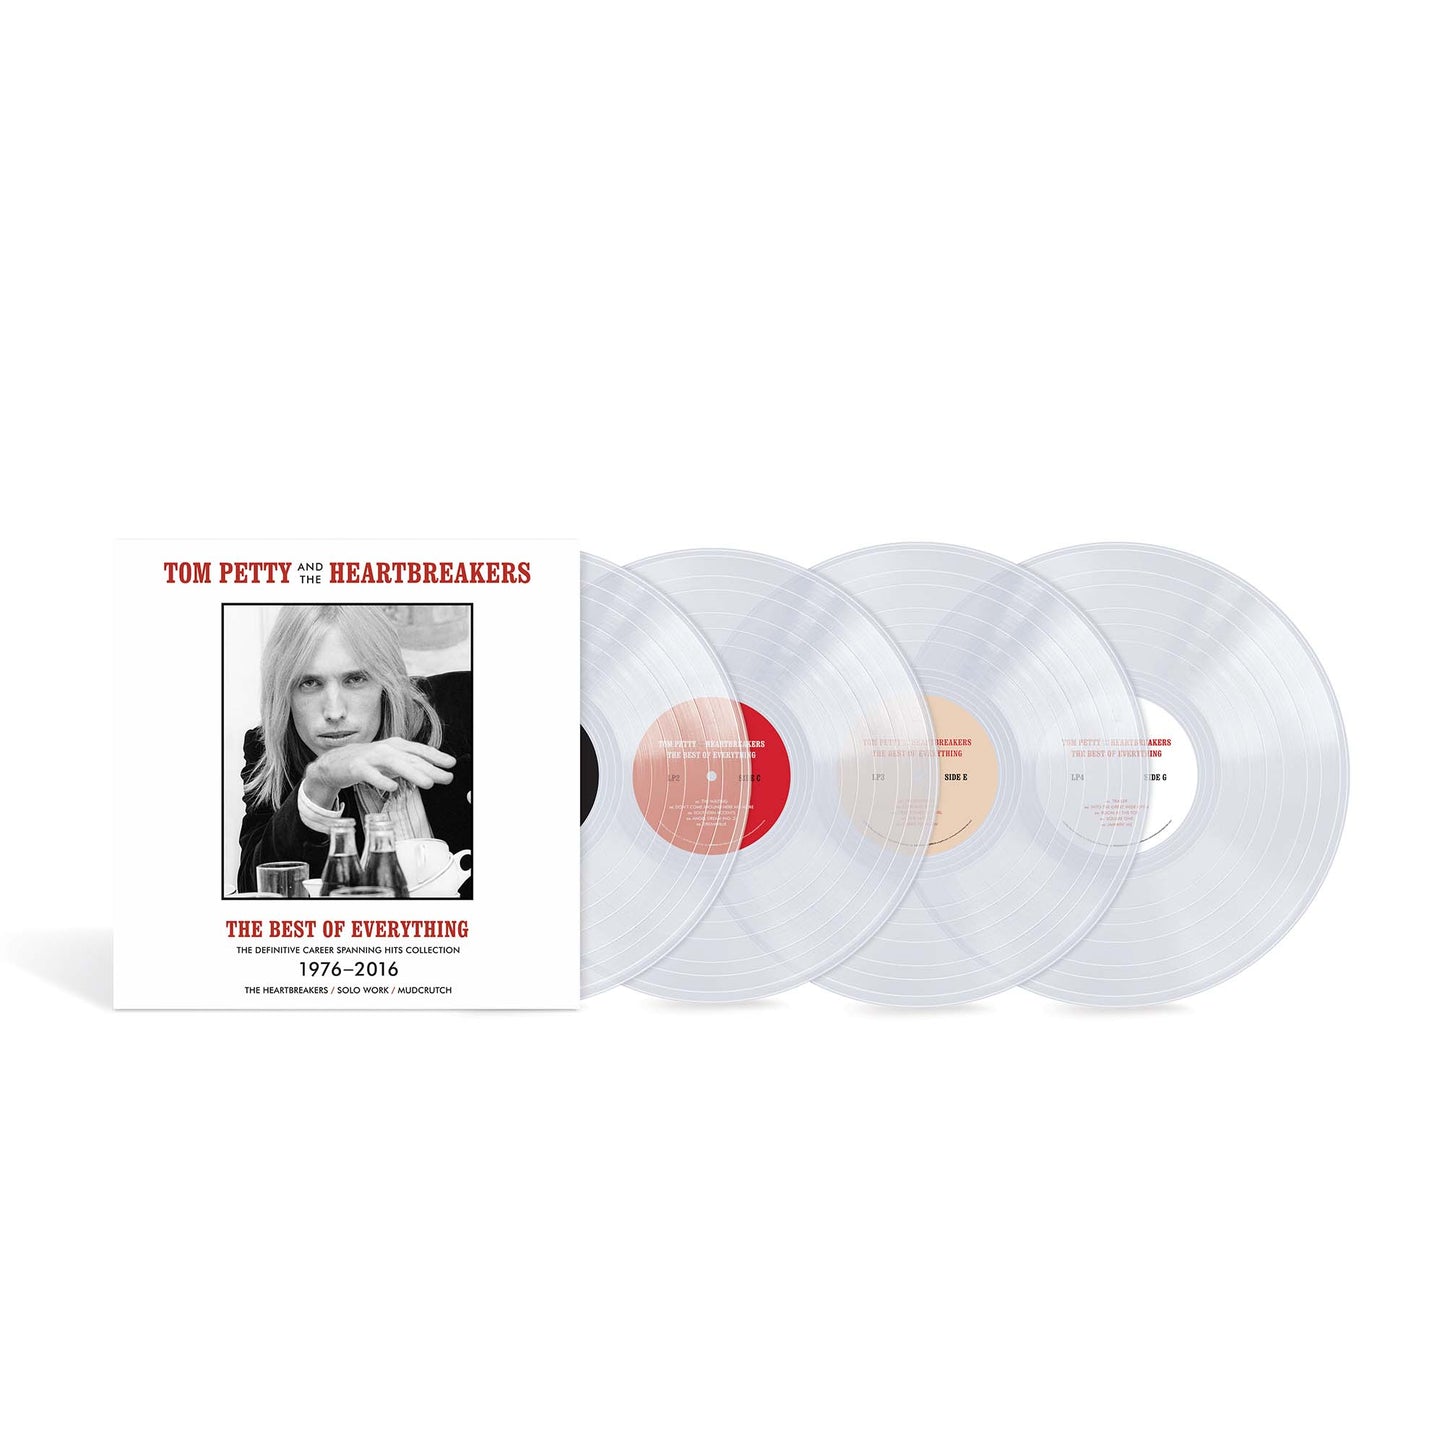 The Best of Everything - E-Comm Exclusive Clear Vinyl 4LP Box Set